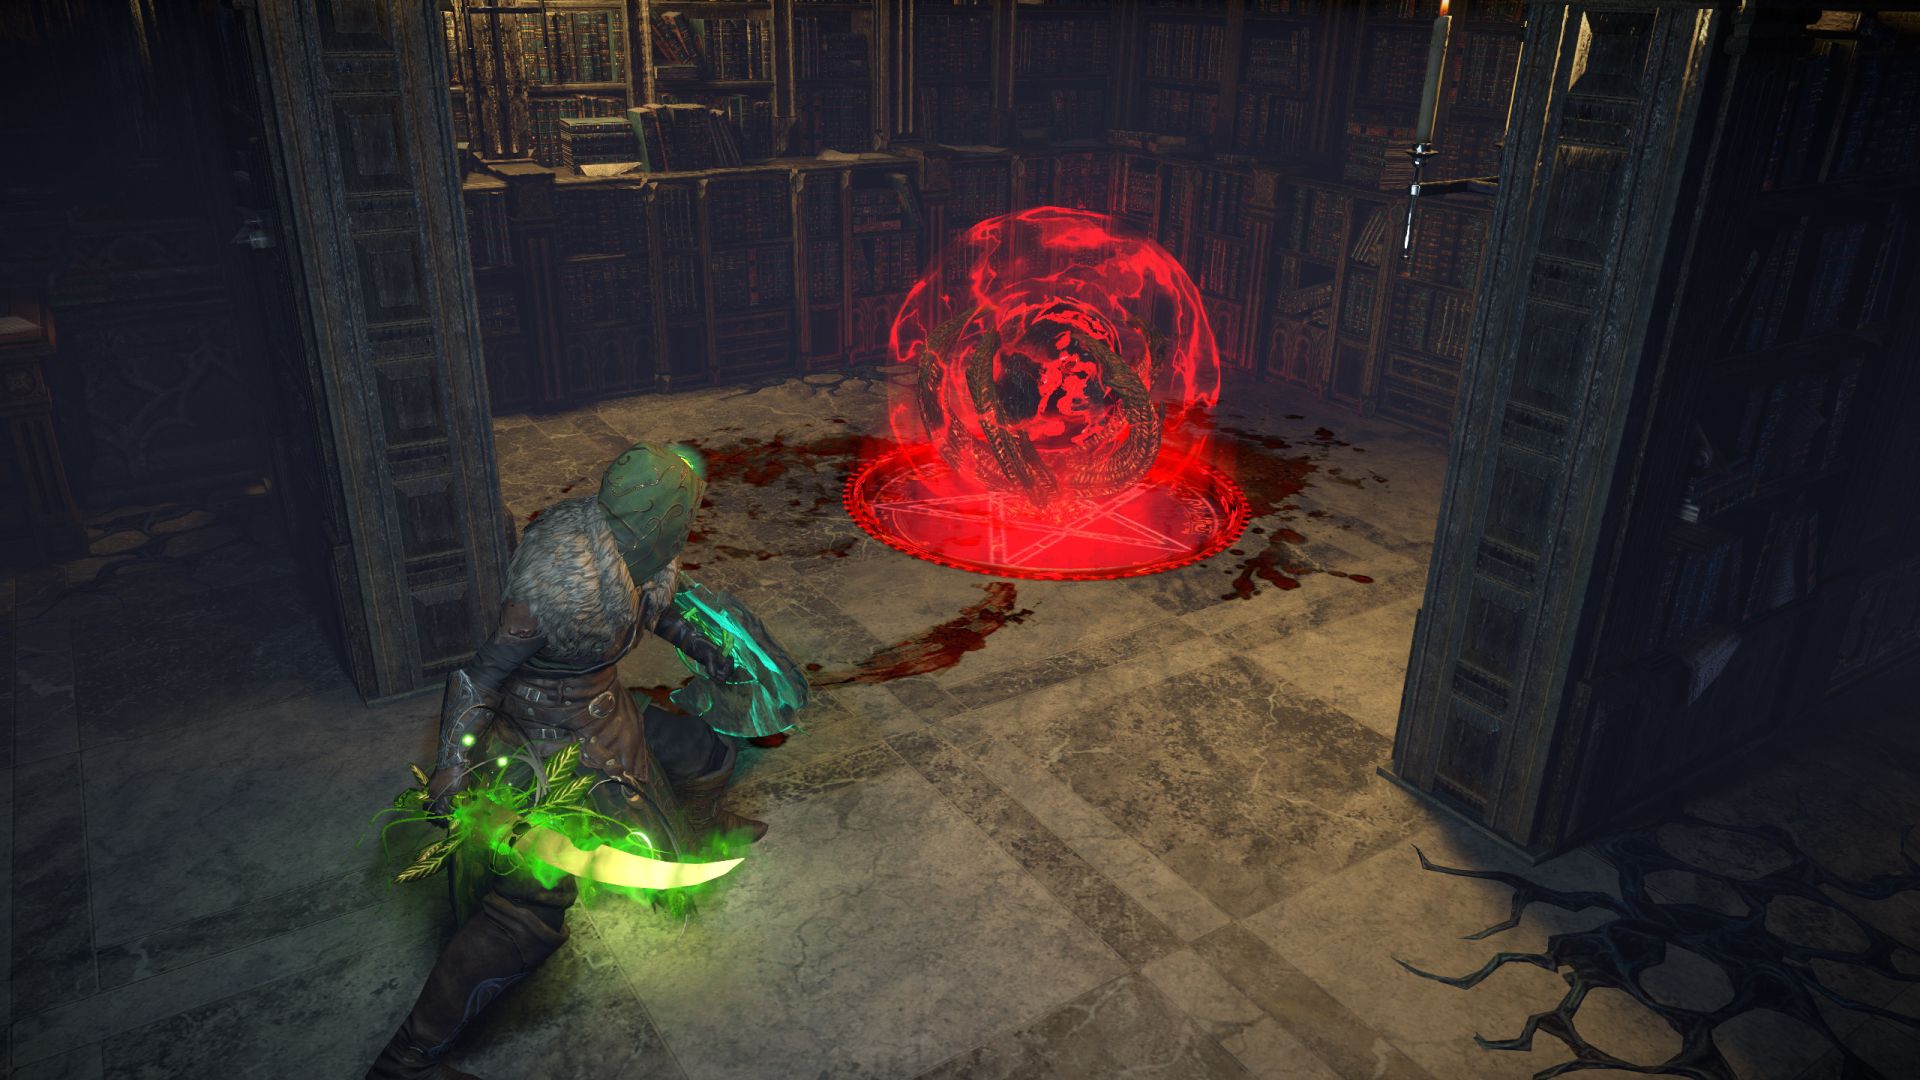 Path of Exile: The Forbidden Sanctum Gameplay Revealed, Adds
Roguelike Game Mode